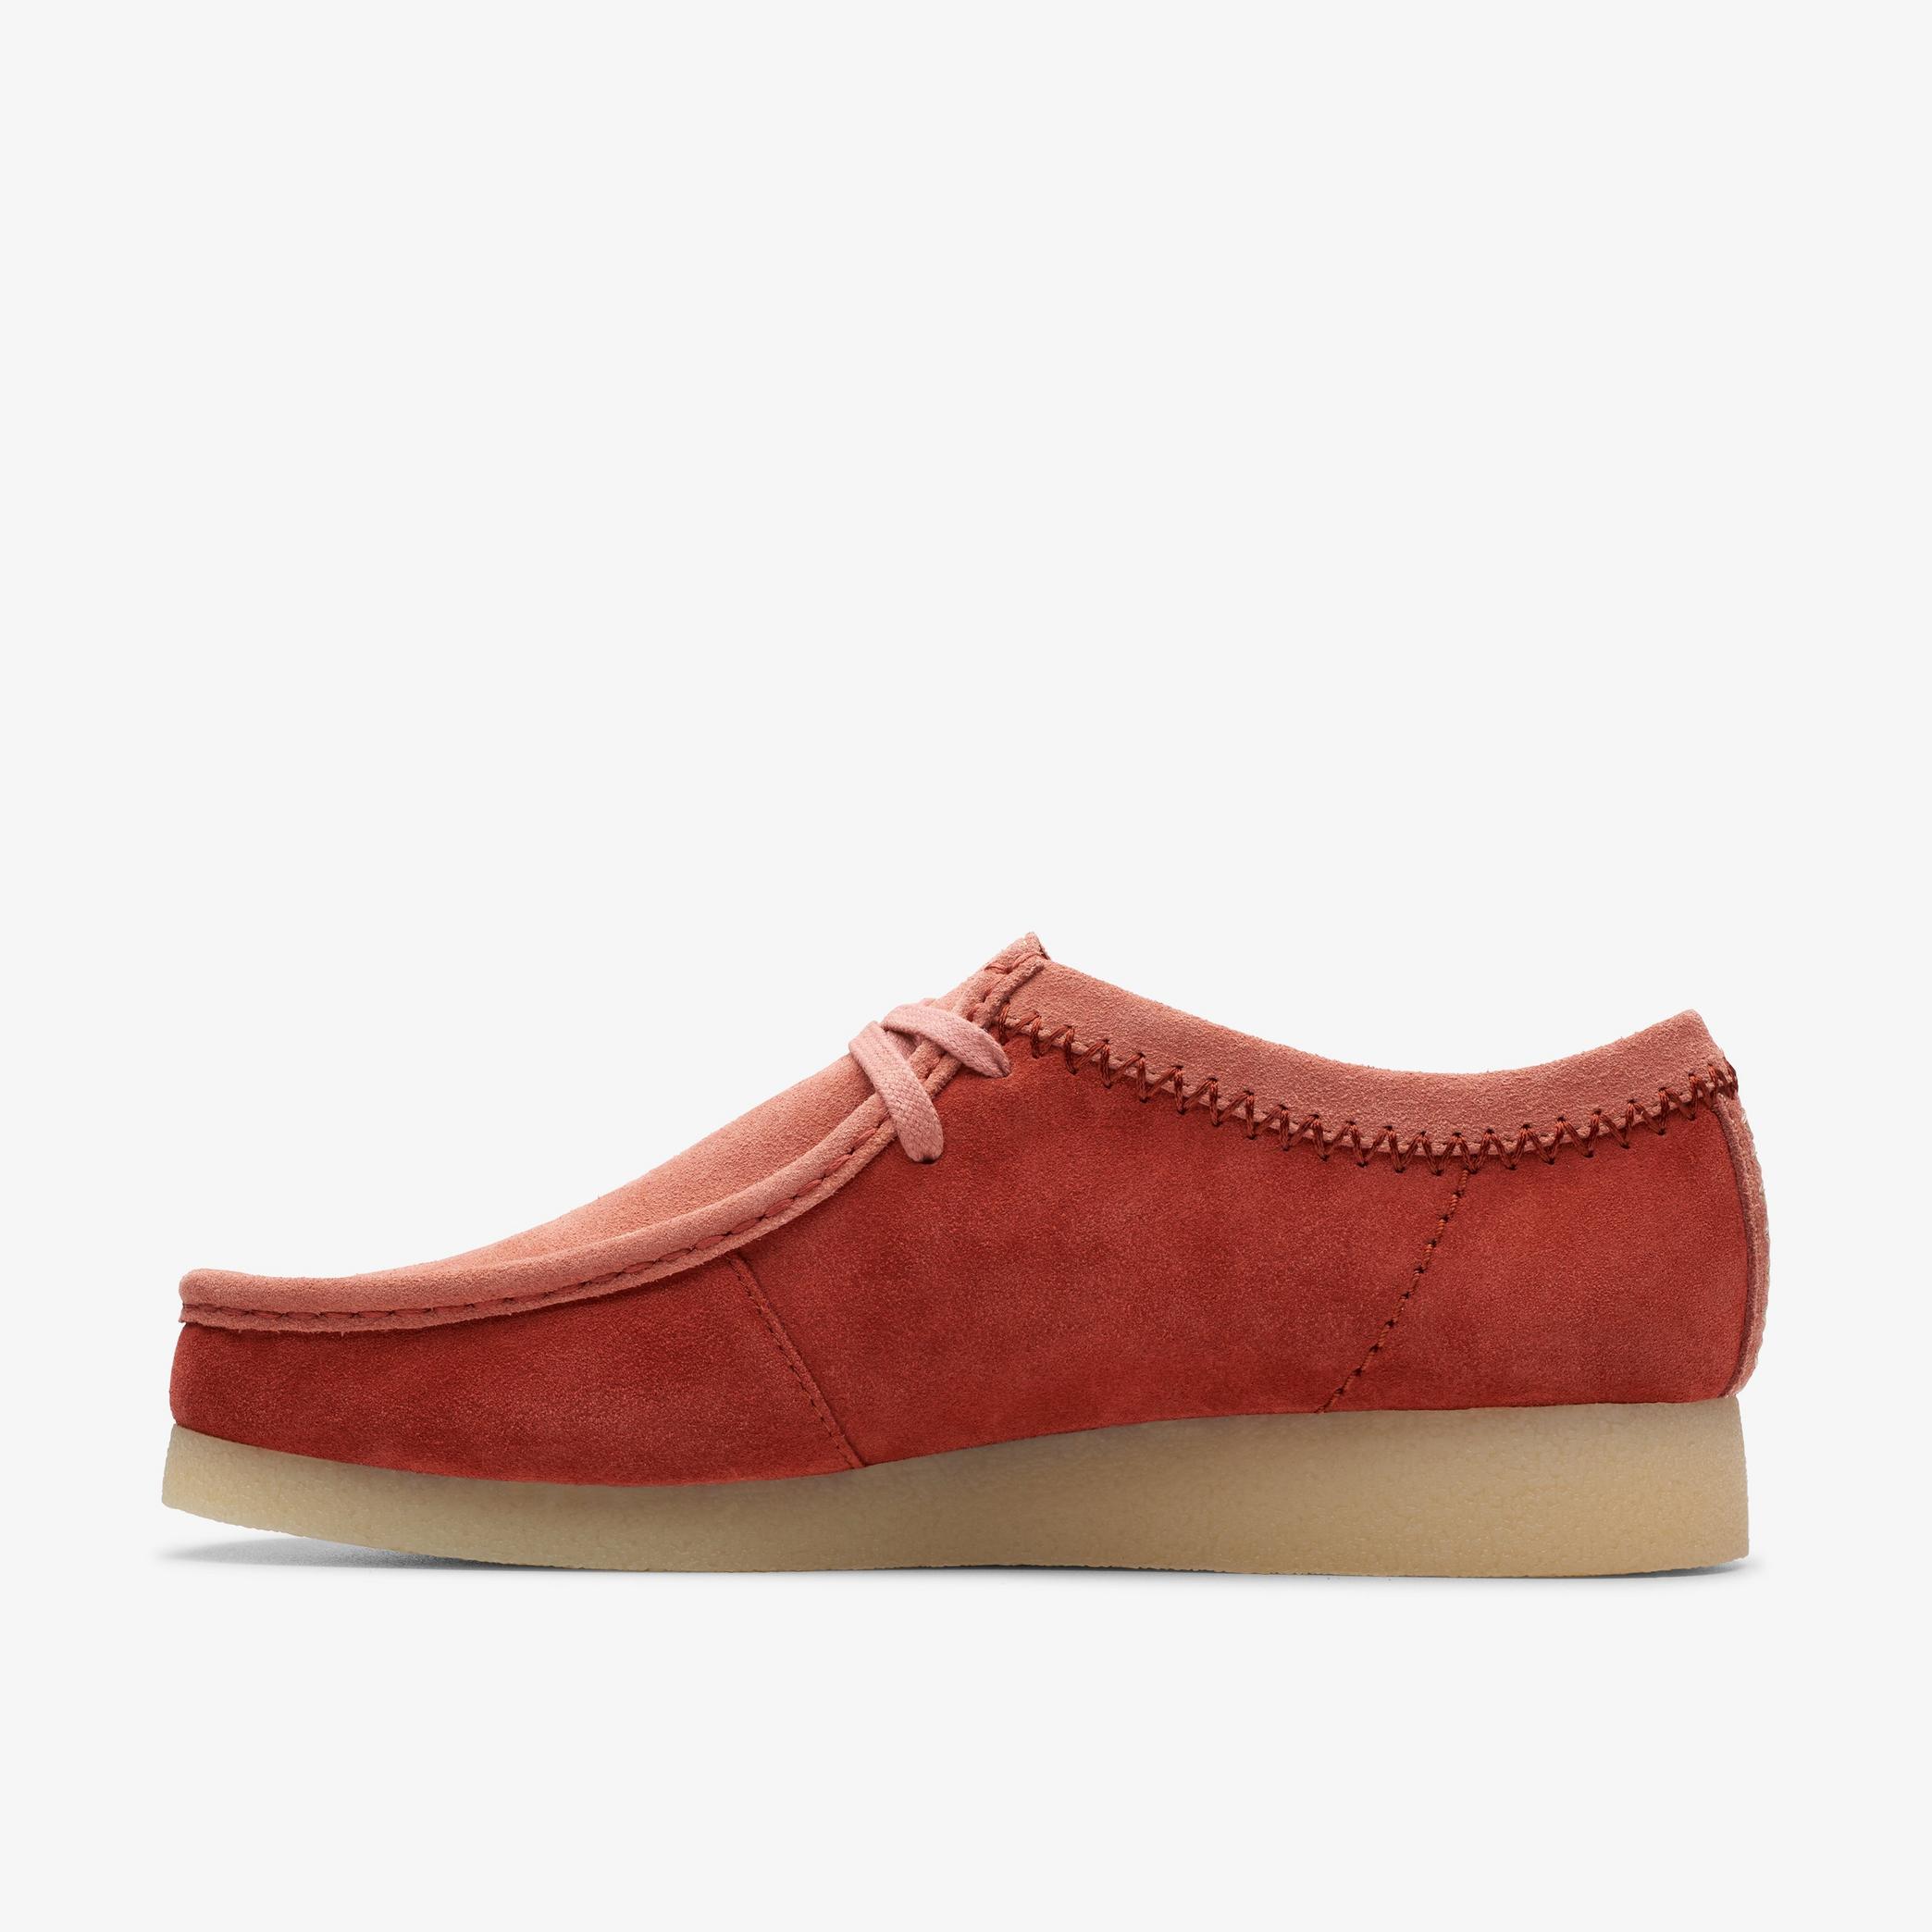 Wallabee EVO Terracotta Suede Moccasins, view 2 of 6